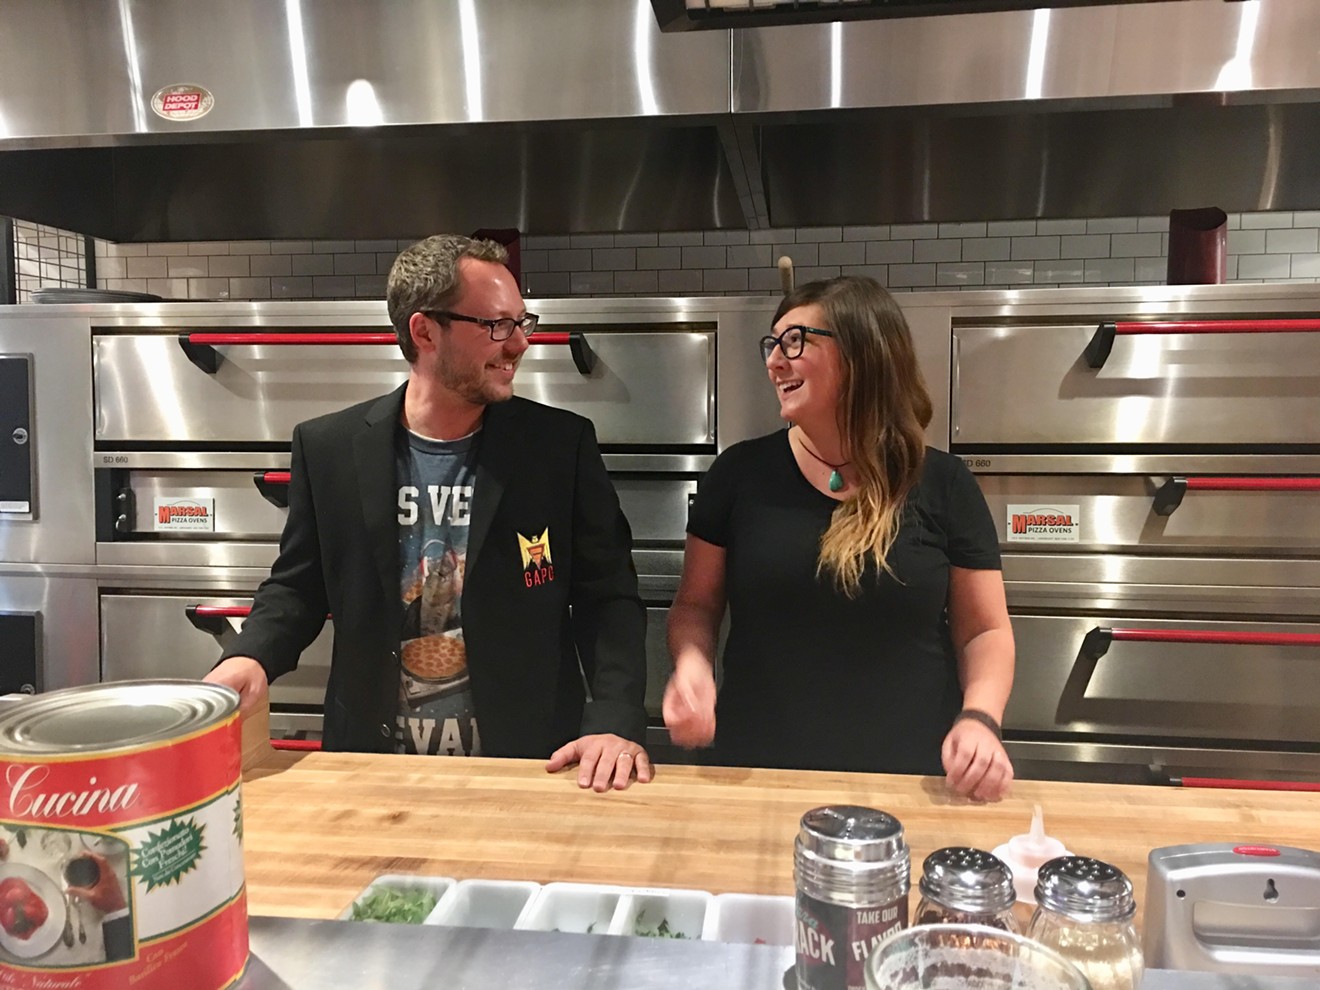 Molly and Sammy Mandell are back at home with their new Greenville Avenue Pizza Co. location at Peavy and Garland roads.